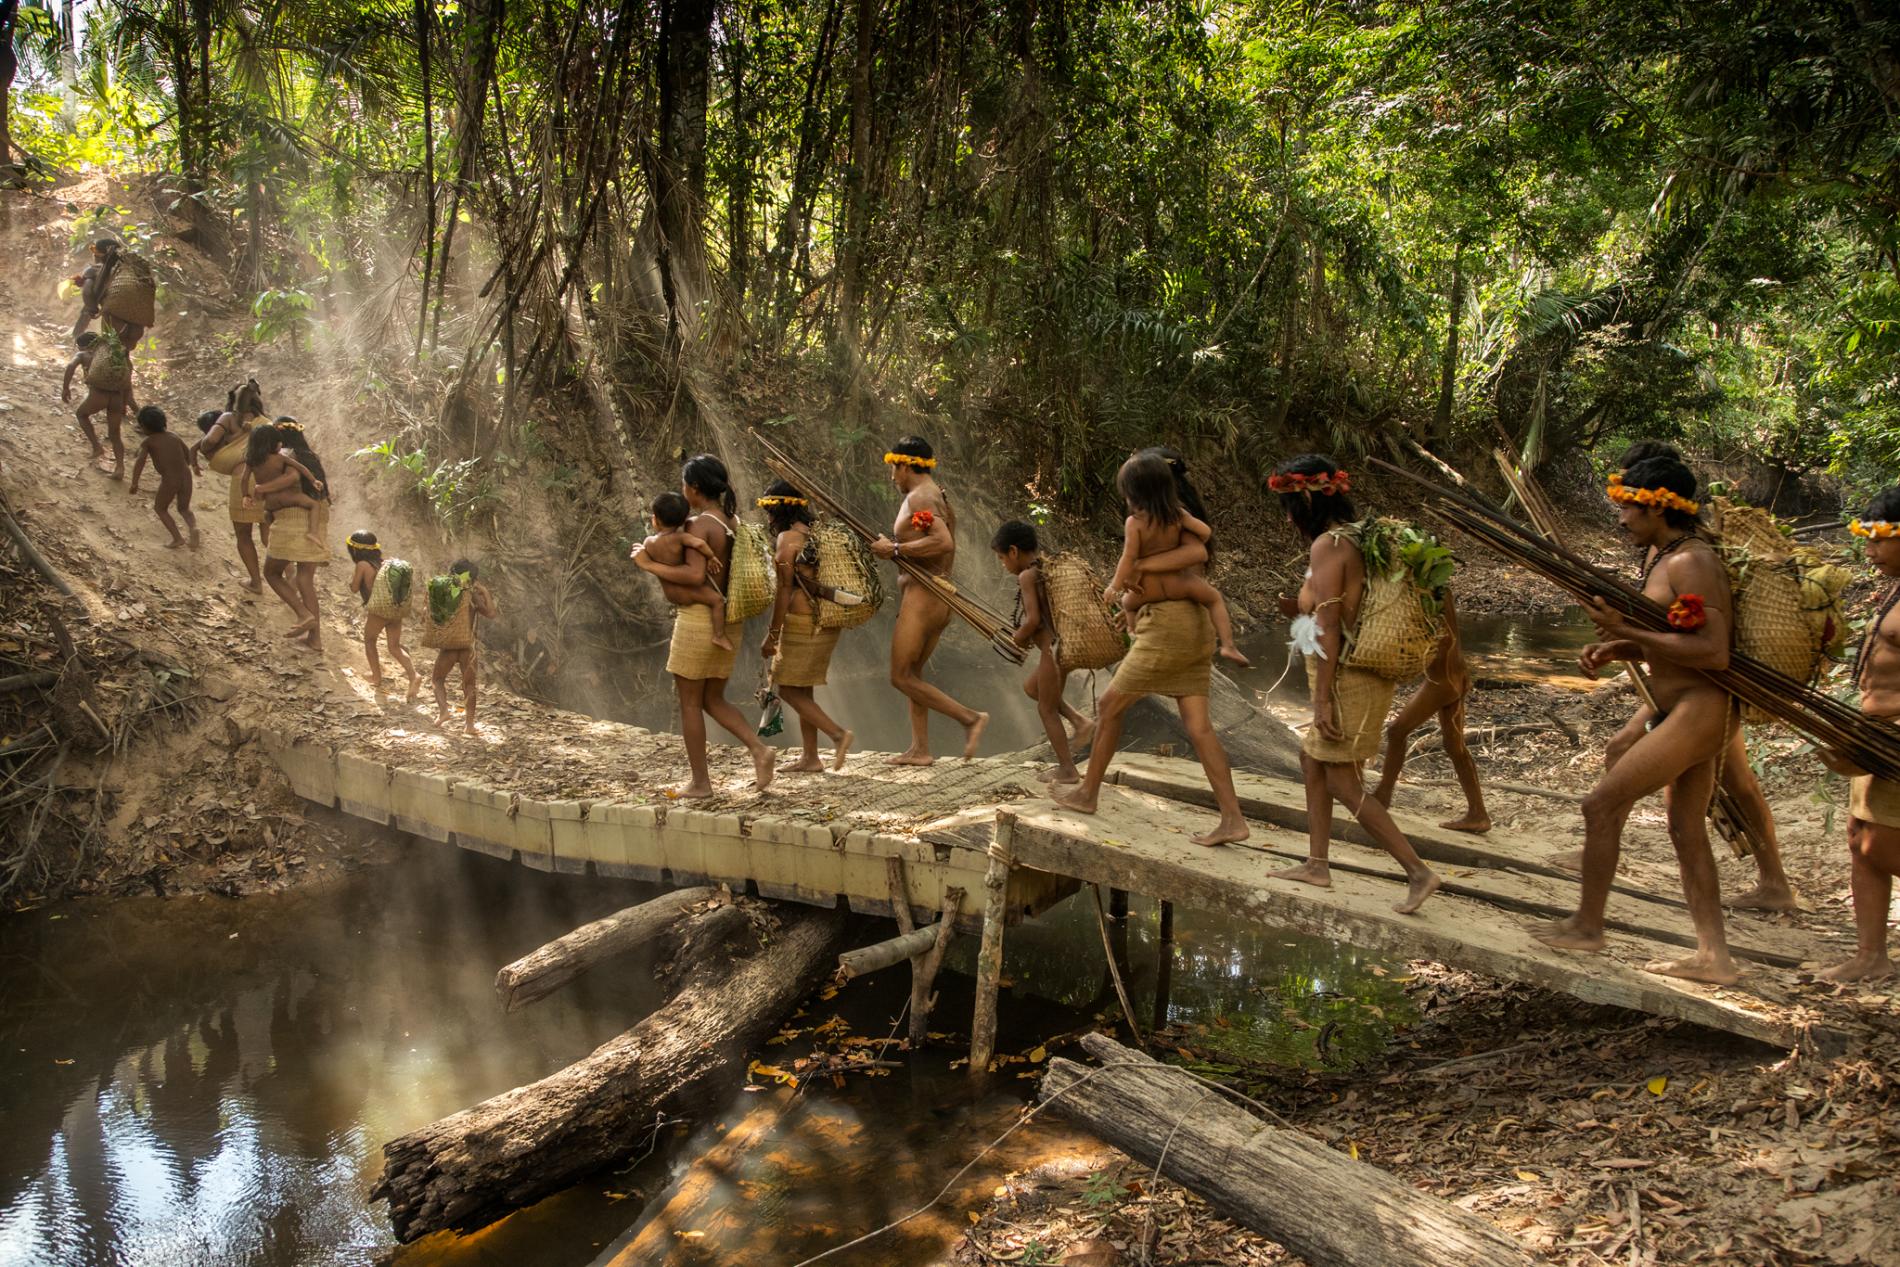 Amazon tribe out hunting. Photo by National Geographic